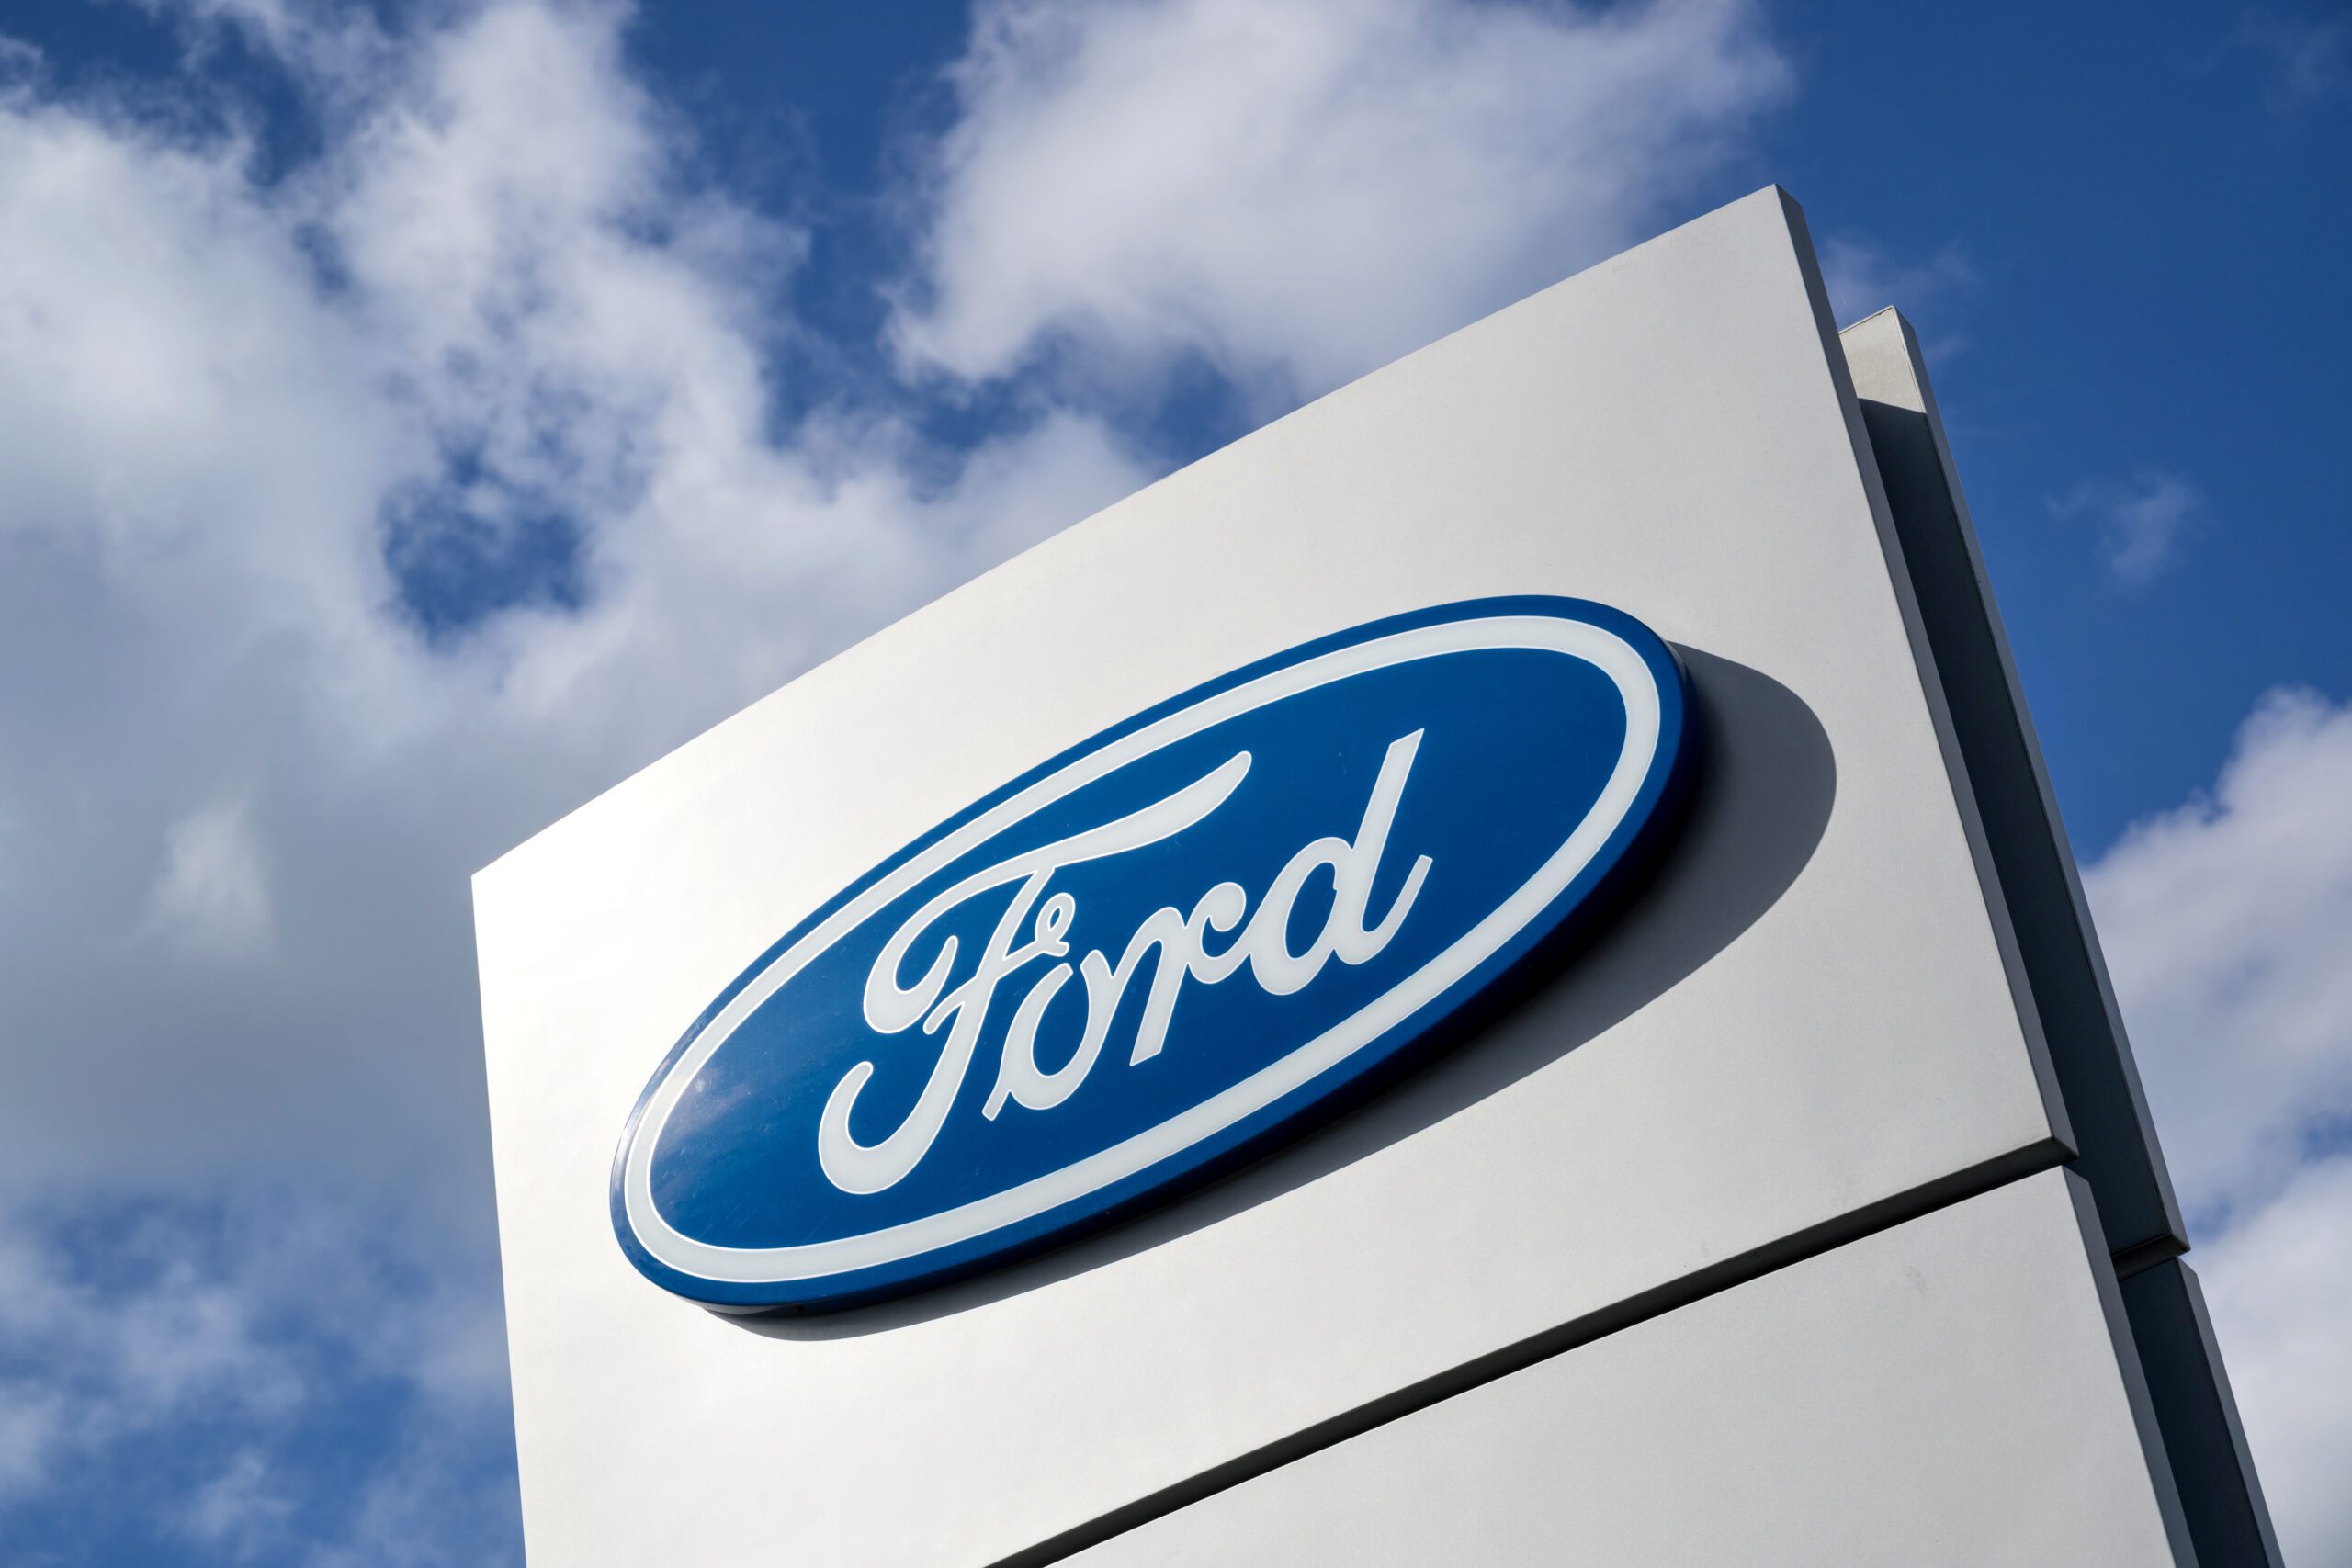 A class action alleges Ford failed to identify vehicle parts that should be classified as “high-cost emissions warranty parts”